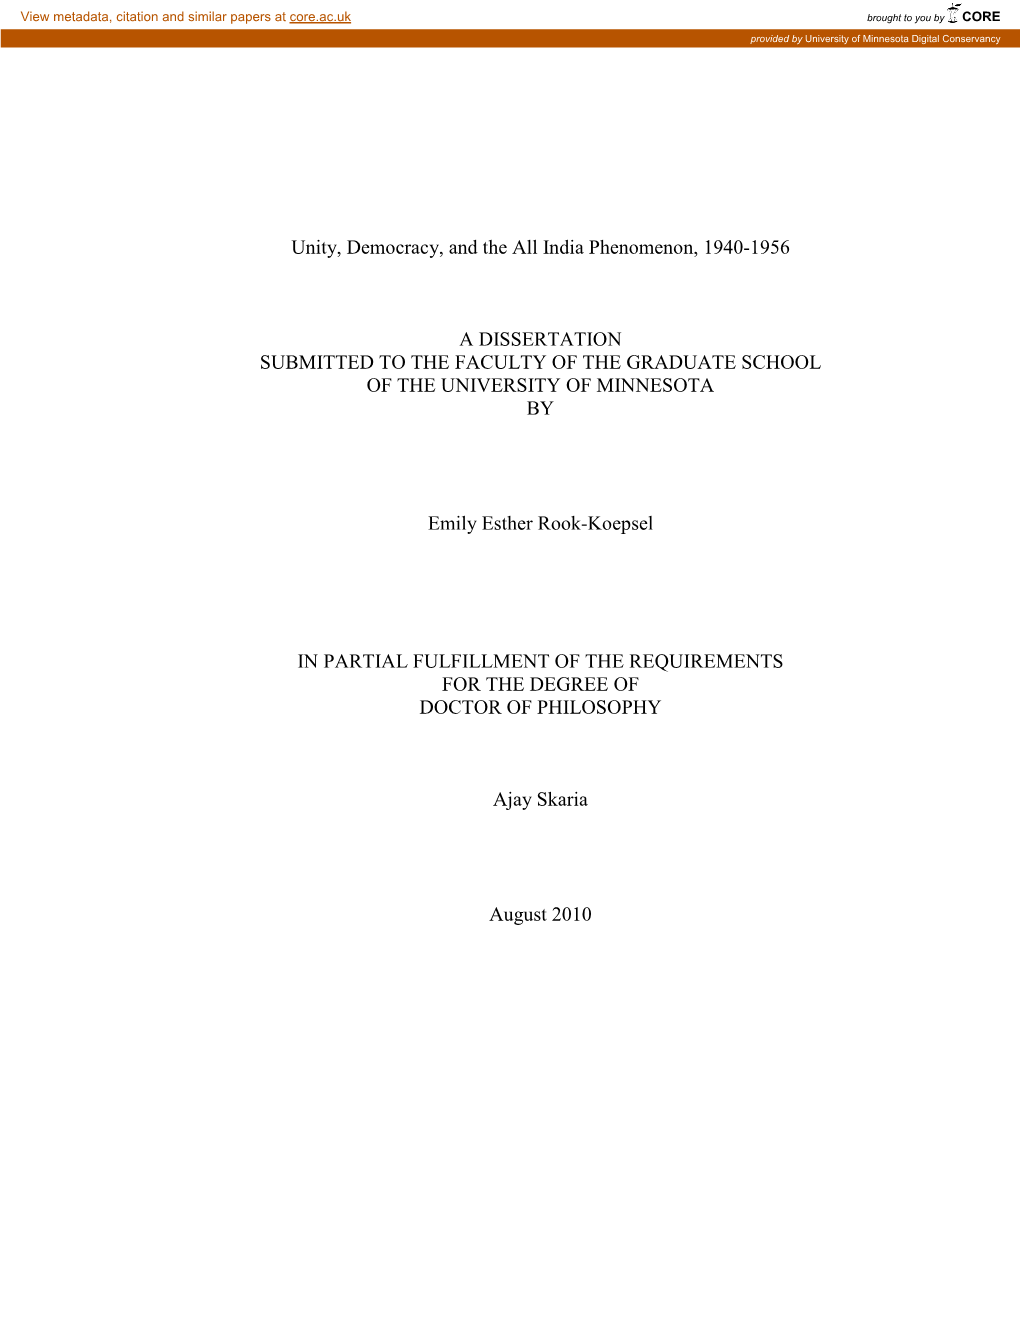 Unity, Democracy, and the All India Phenomenon, 1940-1956 a DISSERTATION SUBMITTED to the FACULTY of the GRADUATE SCHOOL OF